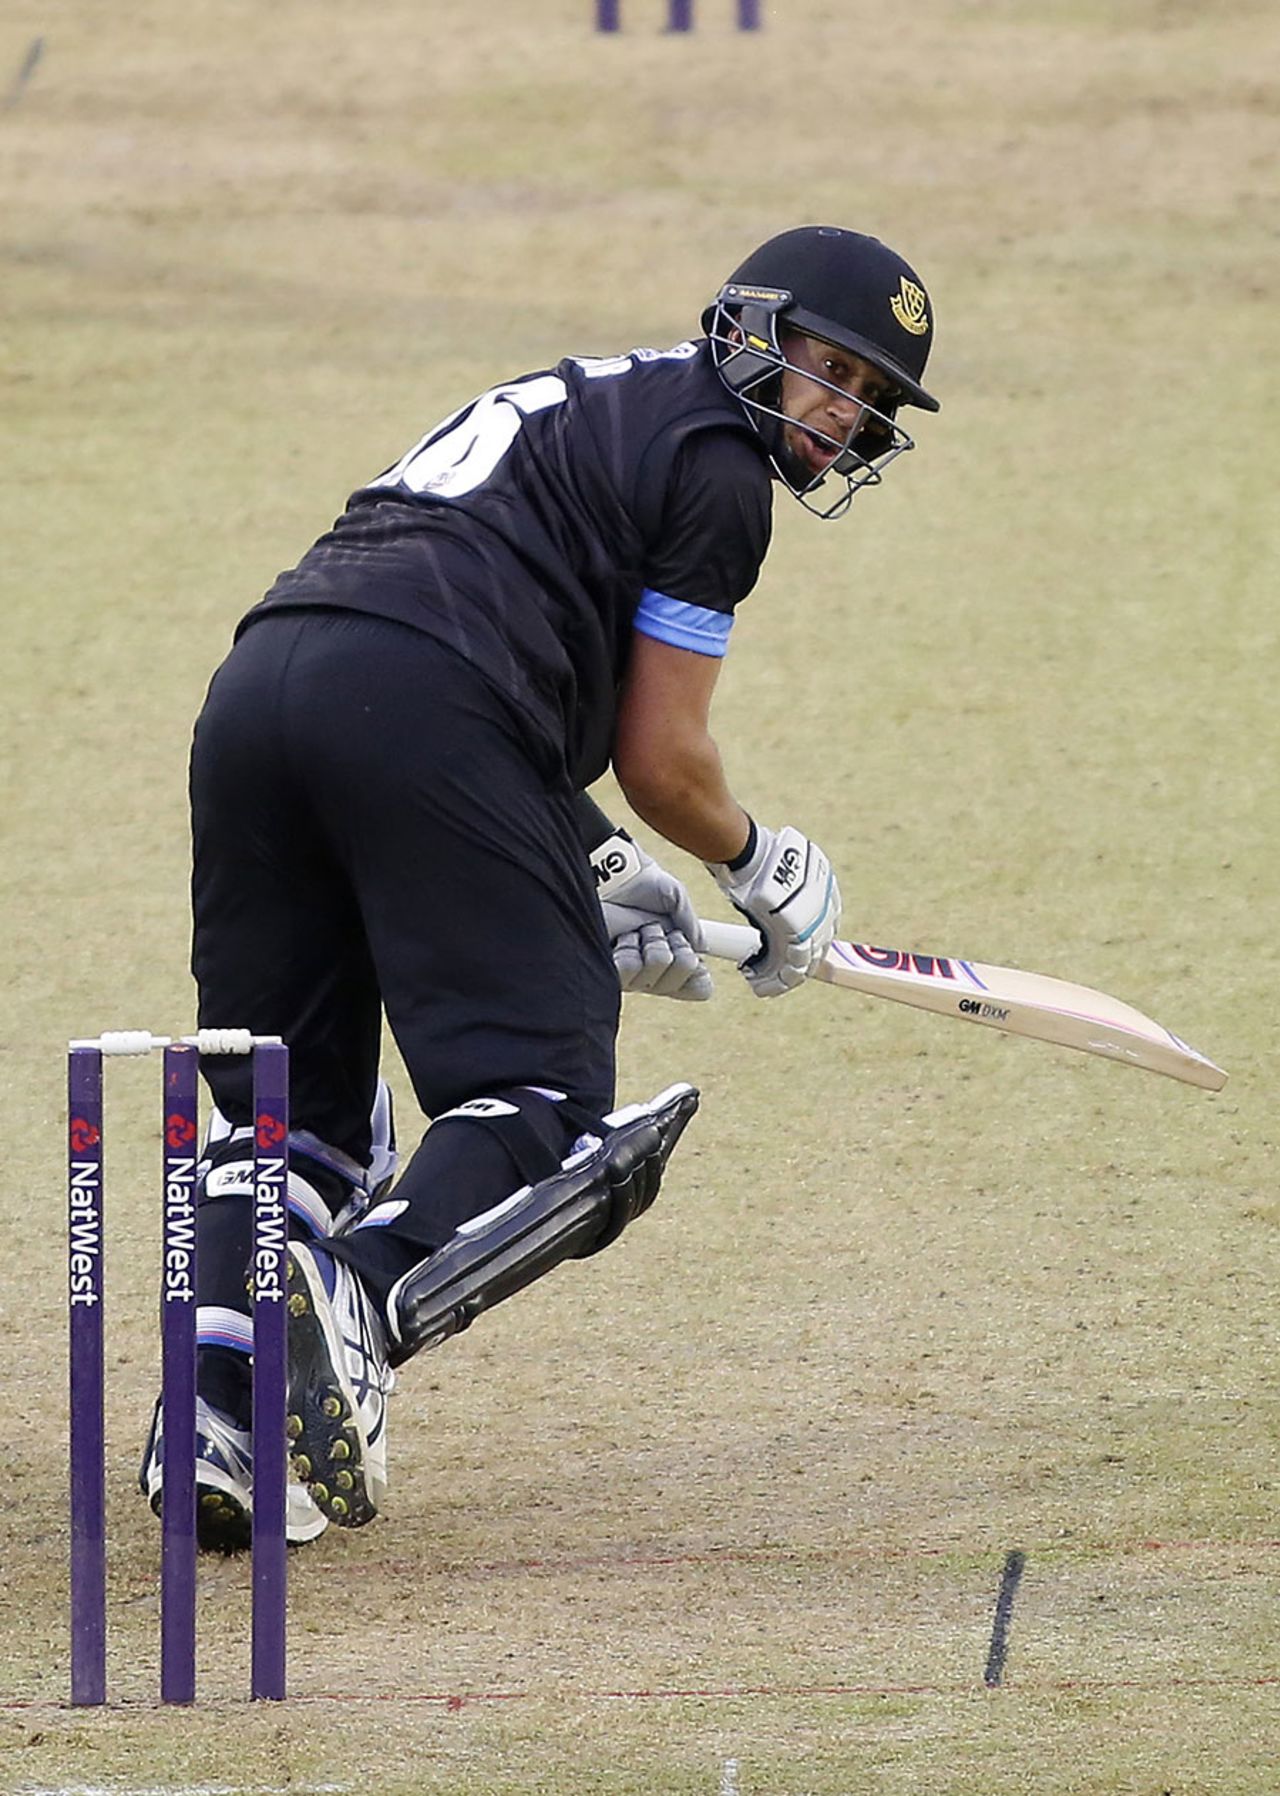 Ross Taylor made 93 off 48 balls, Gloucestershire v Sussex, NatWest T20 Blast, South Group, Bristol, May 20, 2016